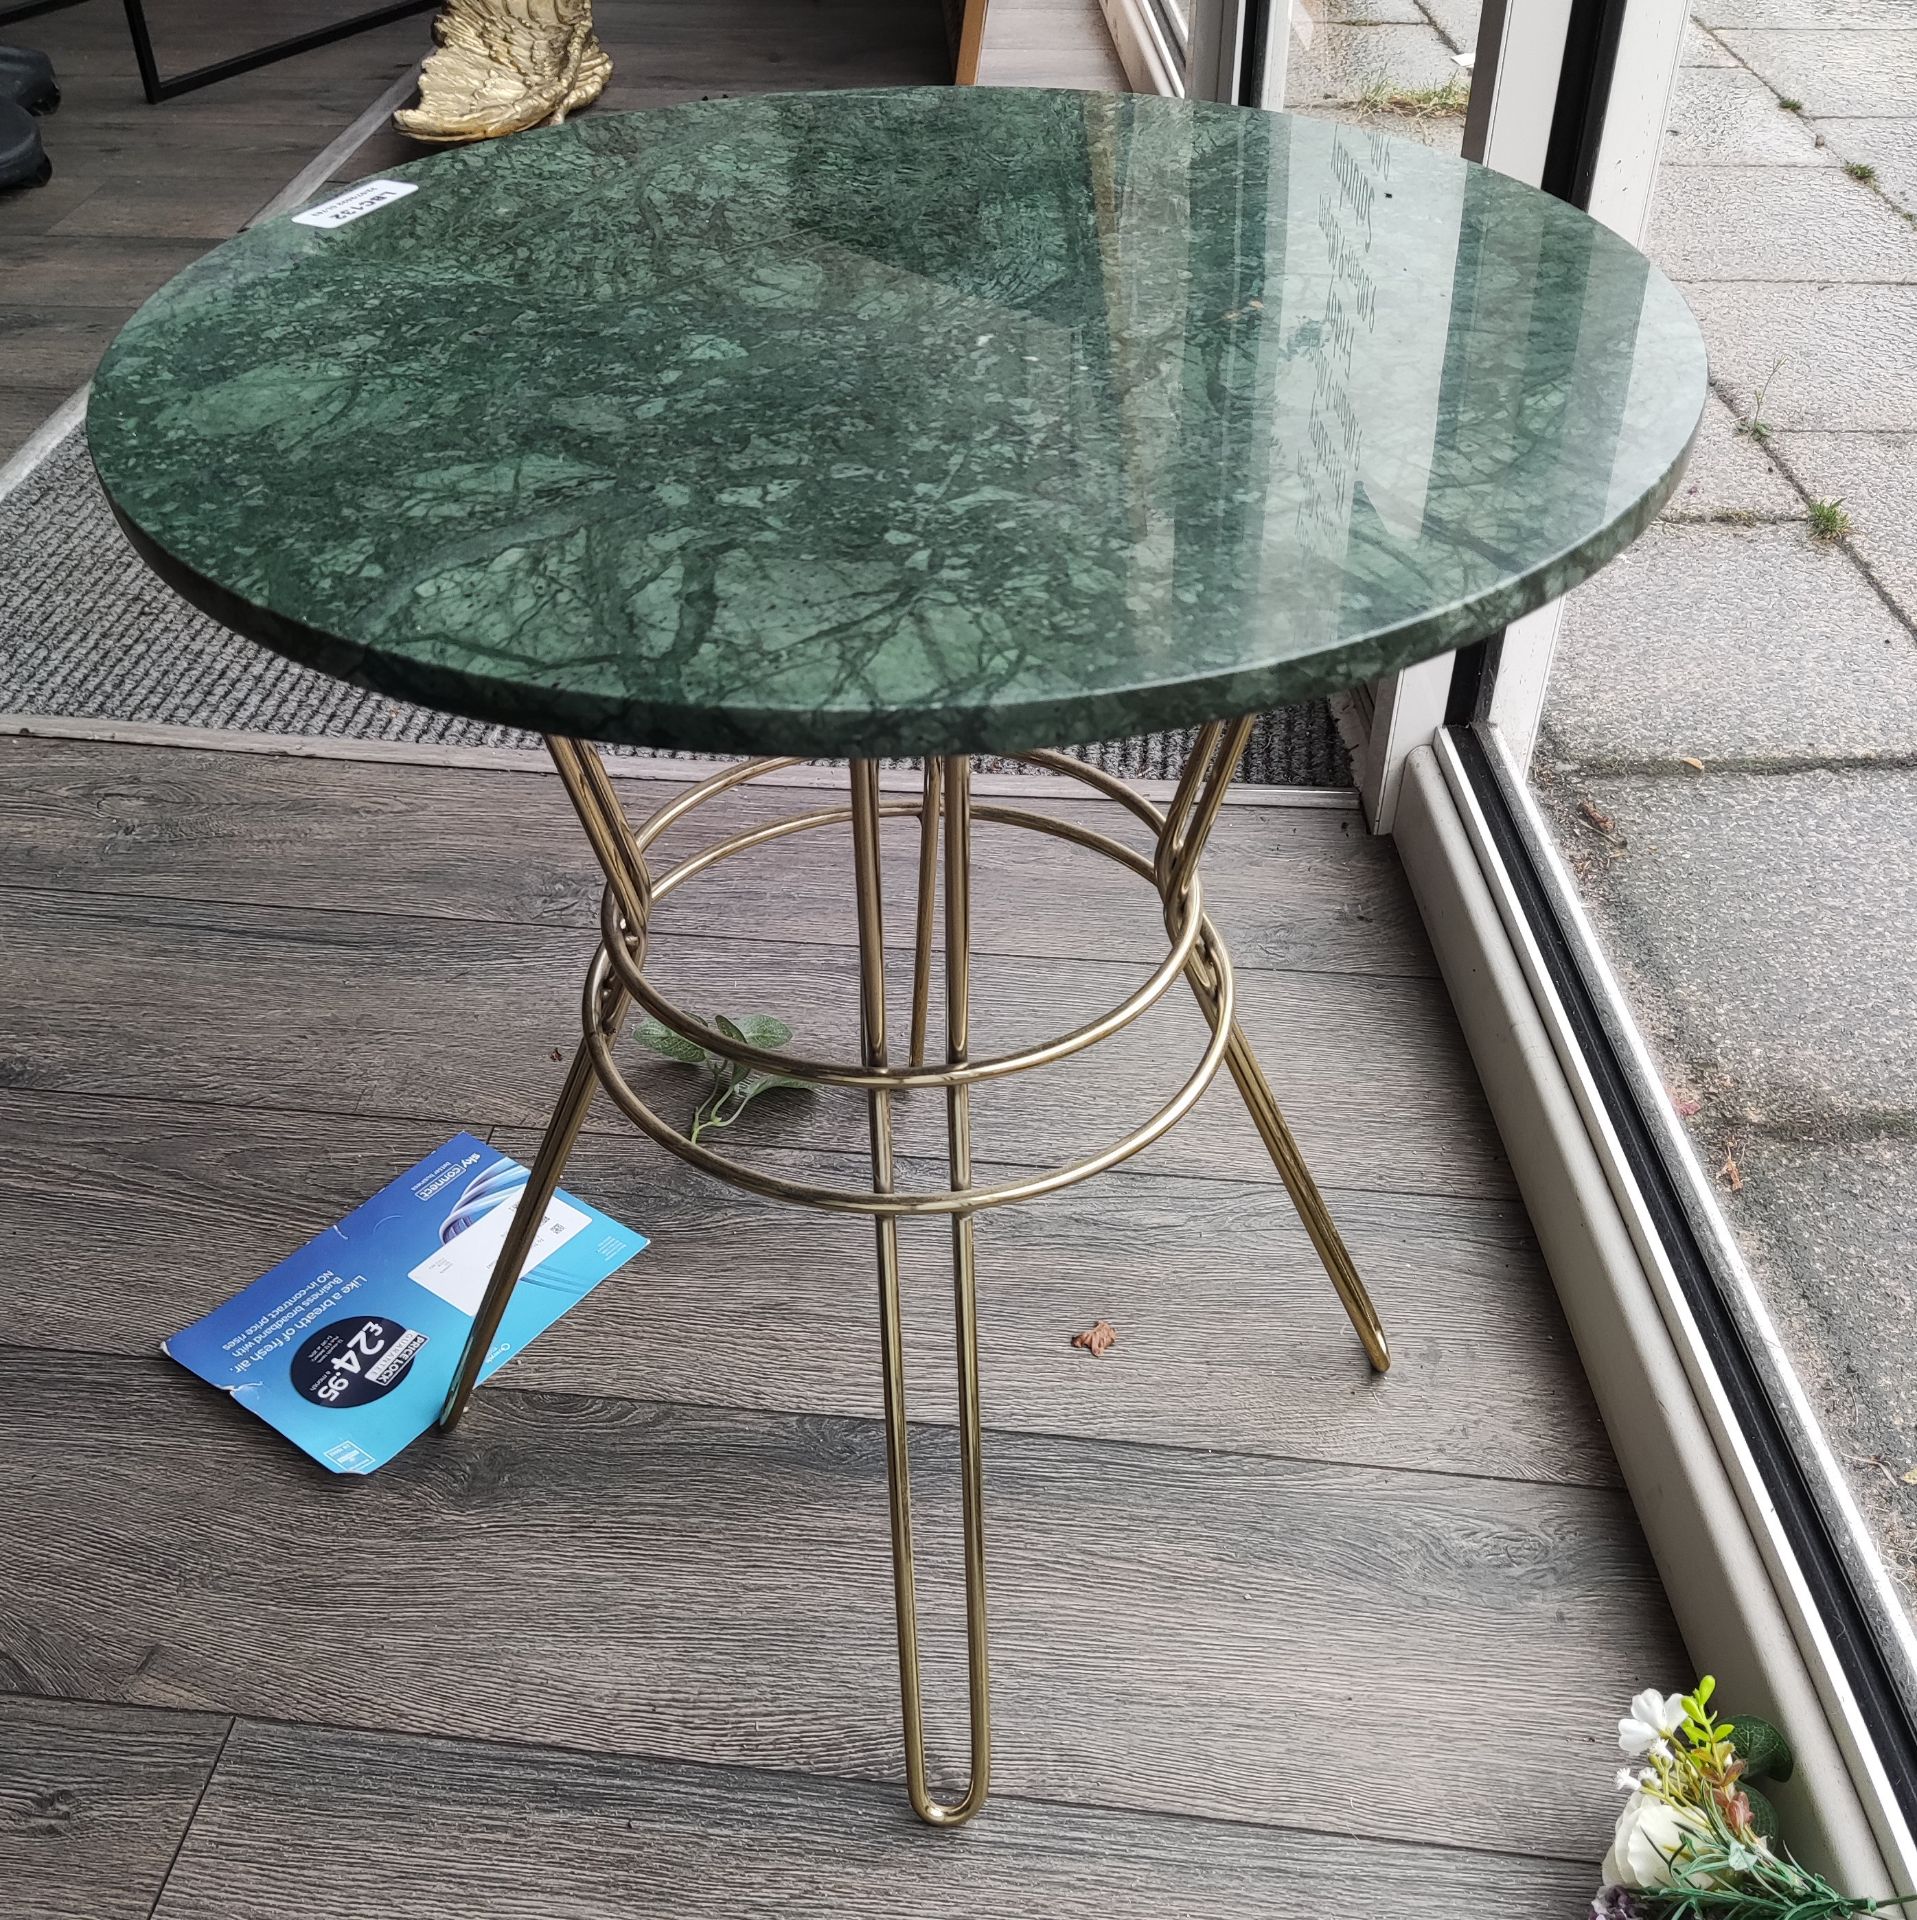 1 x Circular Coffee Table With Green Marble Top - LBC132 - CL763- Location: Sale M33Dimensio - Image 2 of 3